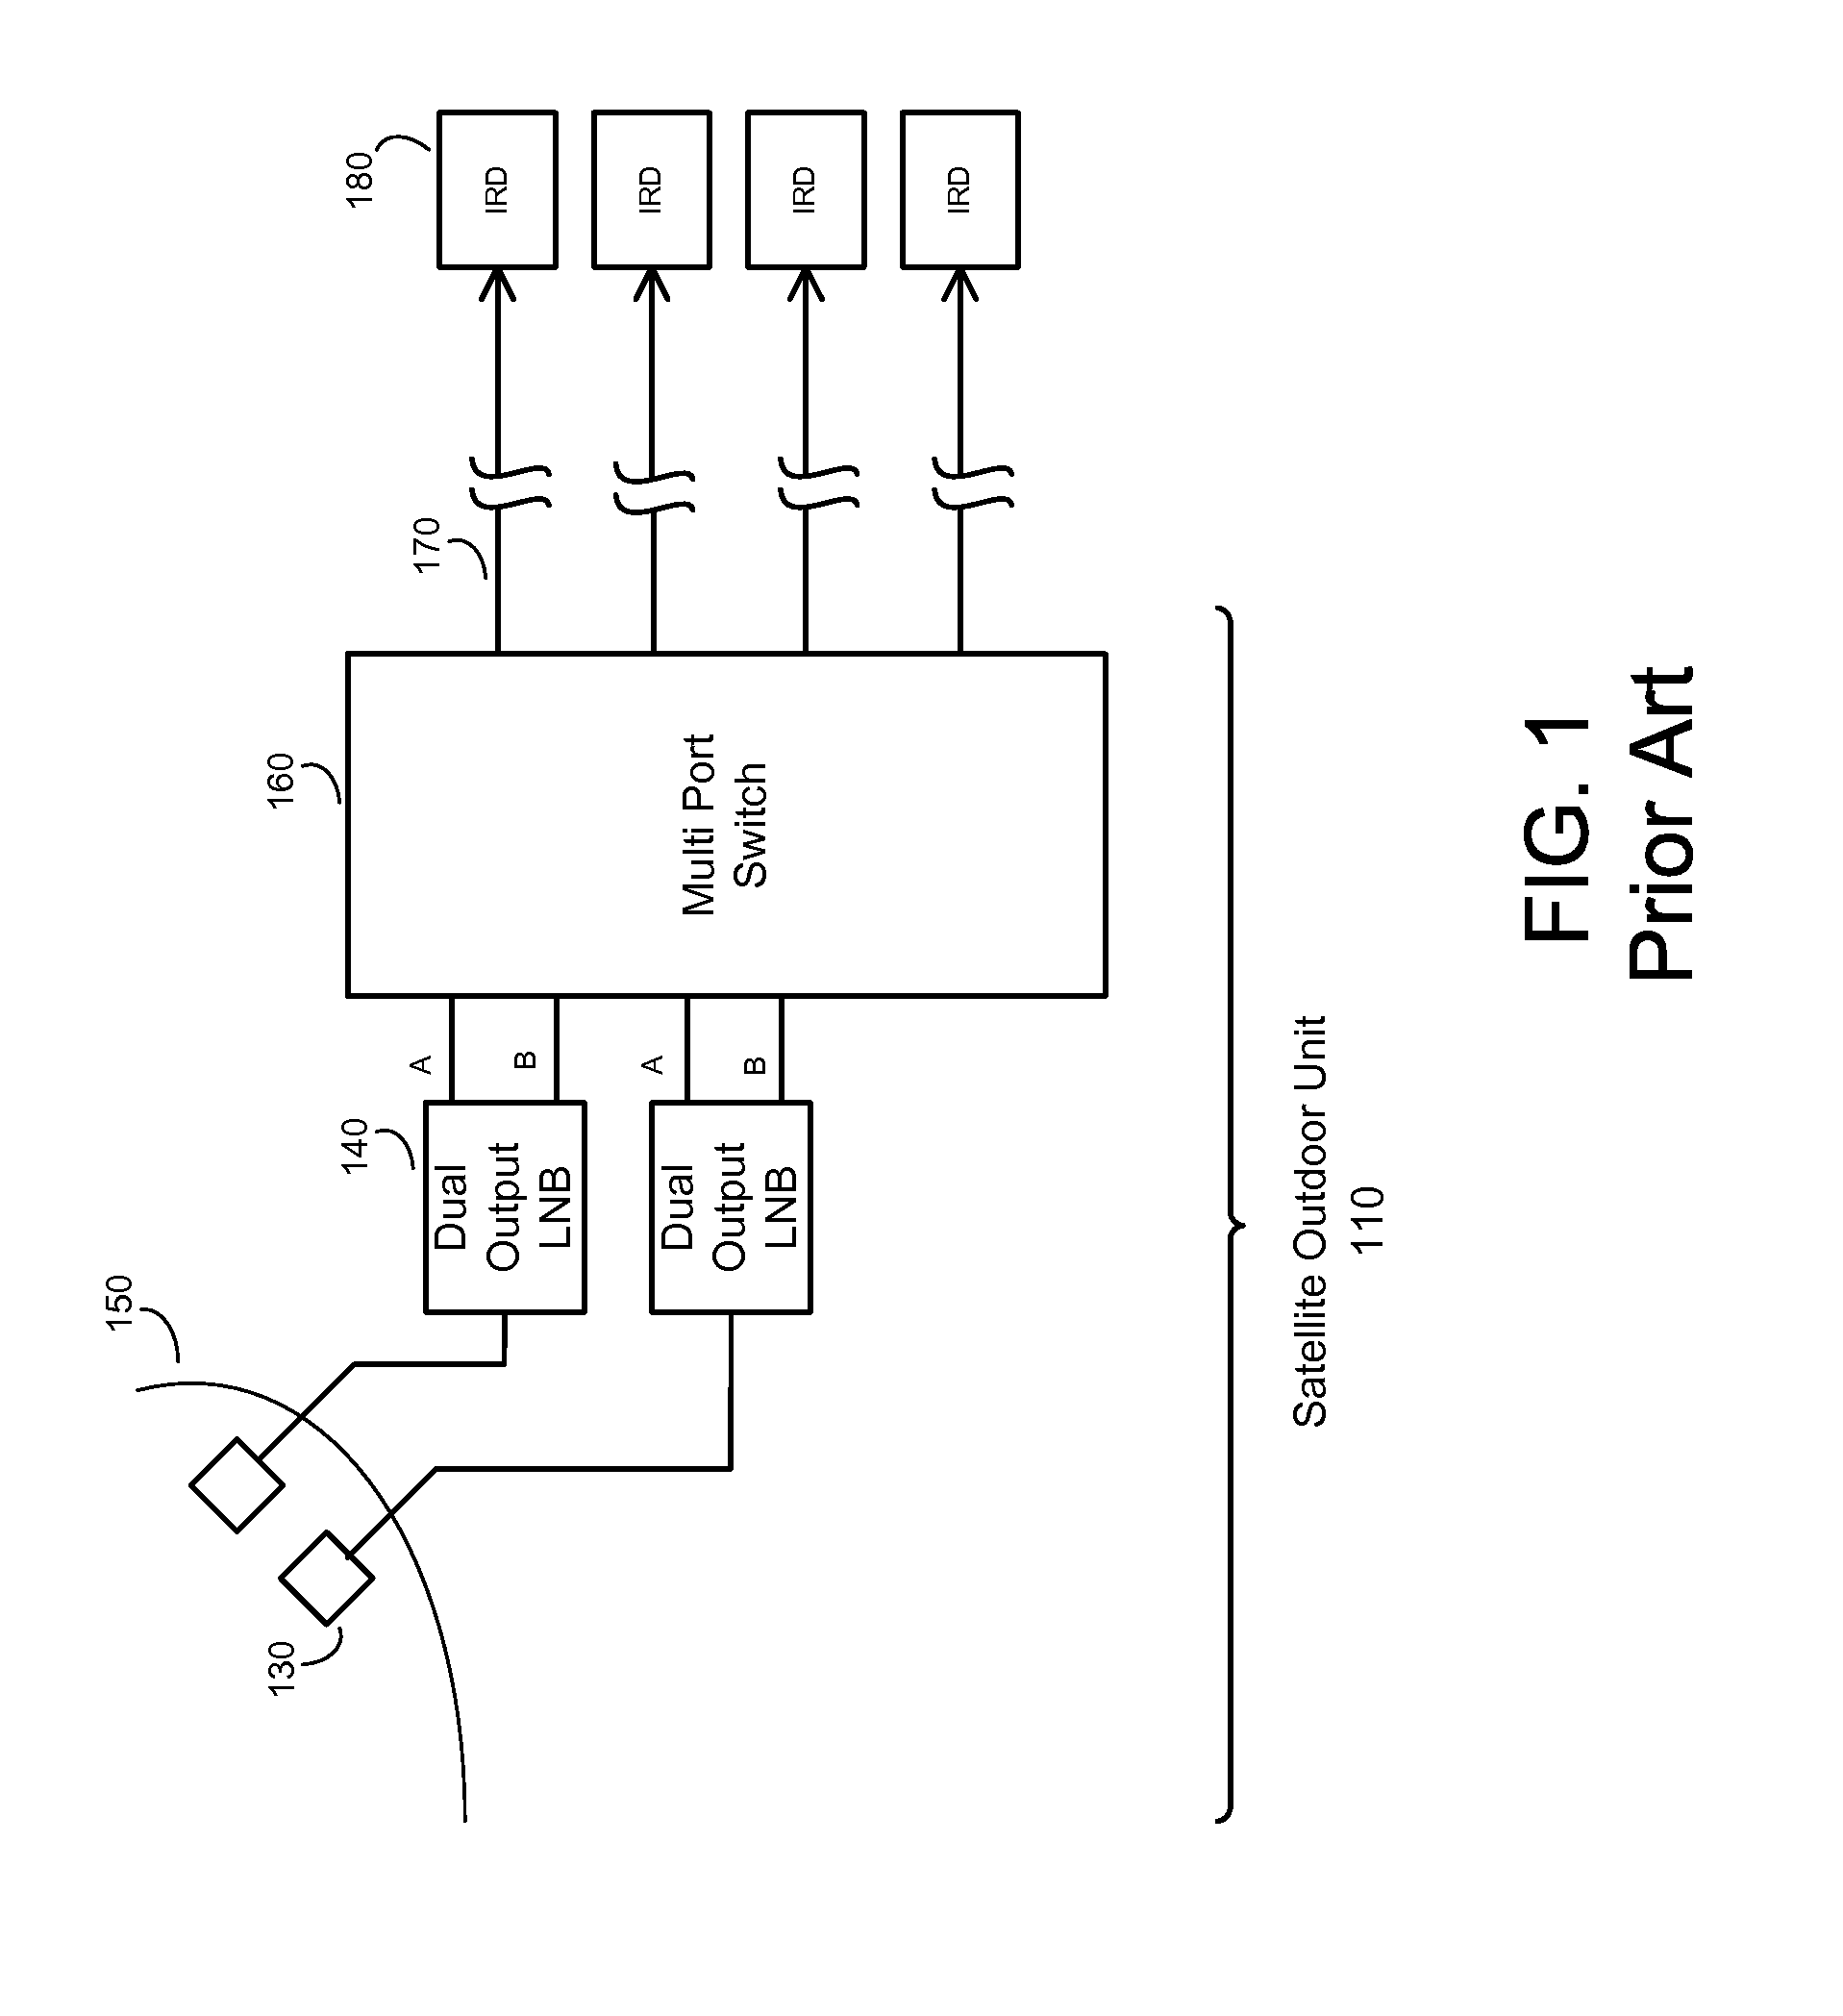 Signal selector and combiner for broadband content distribution